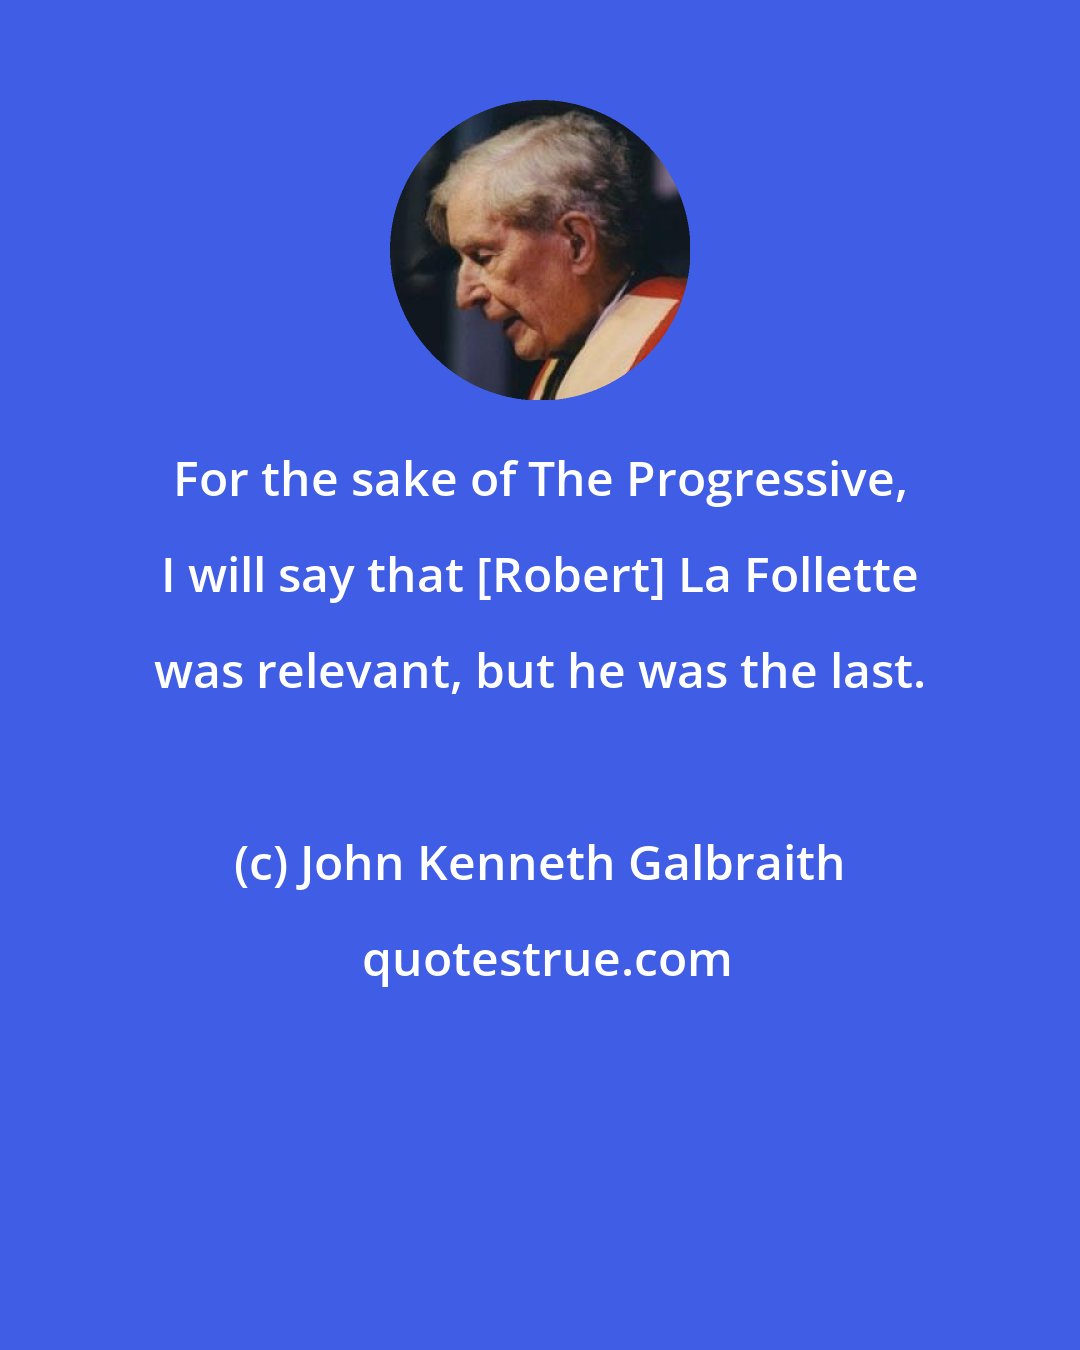 John Kenneth Galbraith: For the sake of The Progressive, I will say that [Robert] La Follette was relevant, but he was the last.